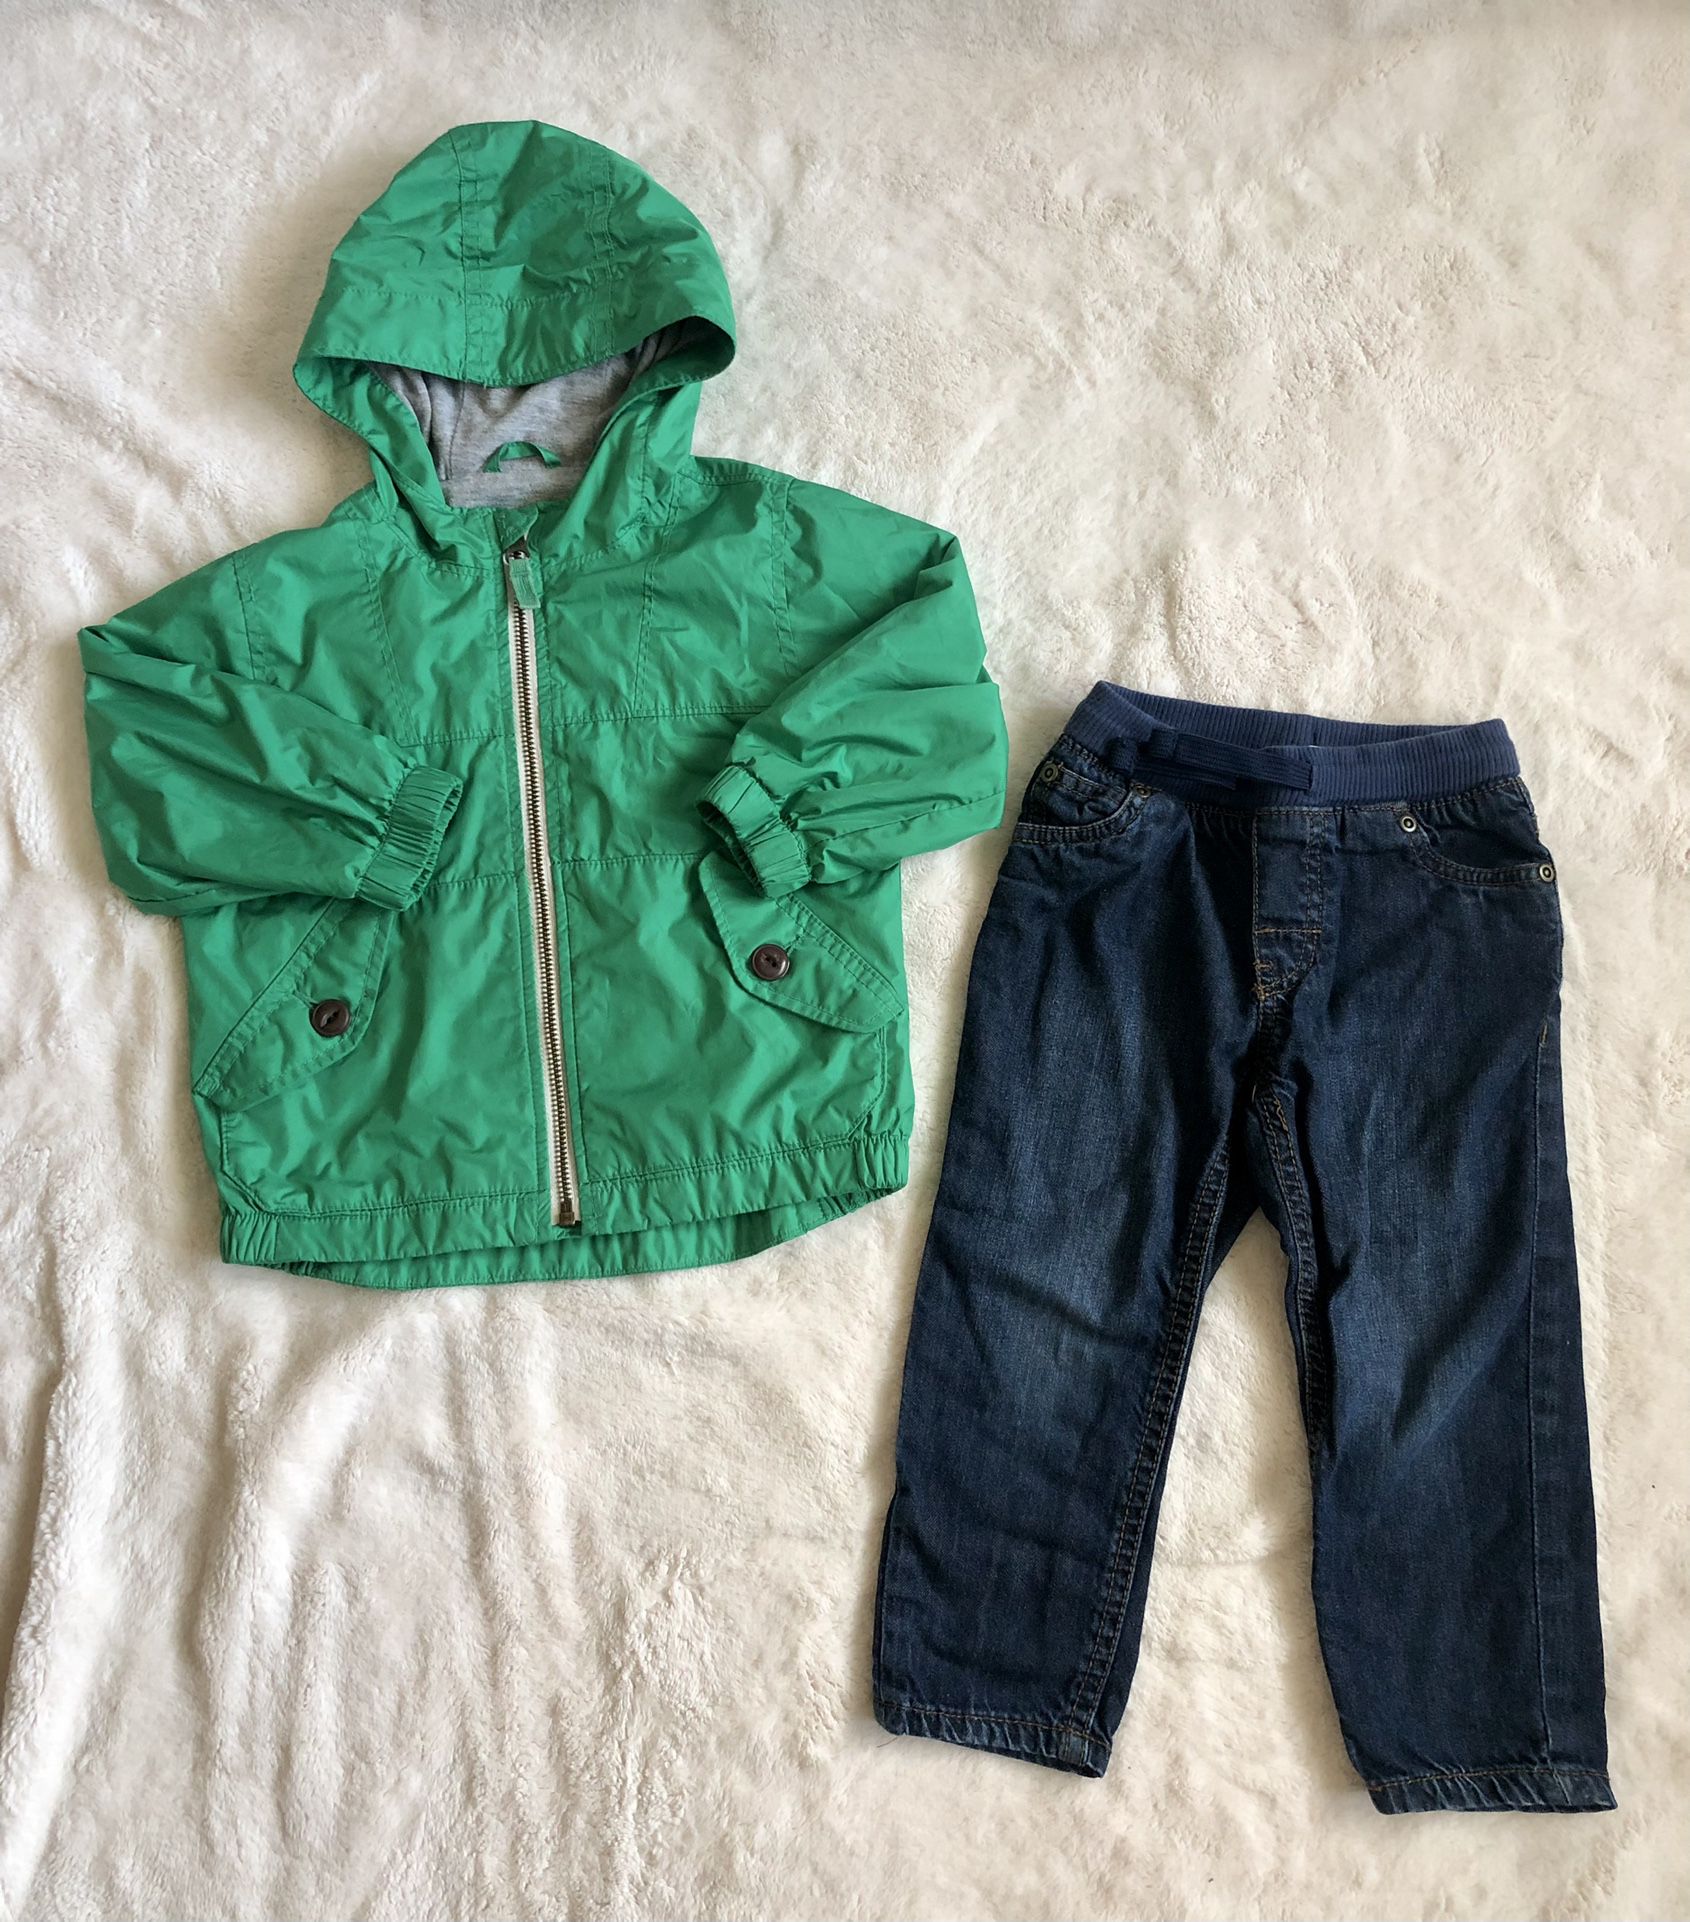 Kids Size 18-24, 2T Boys Clothes Outfit